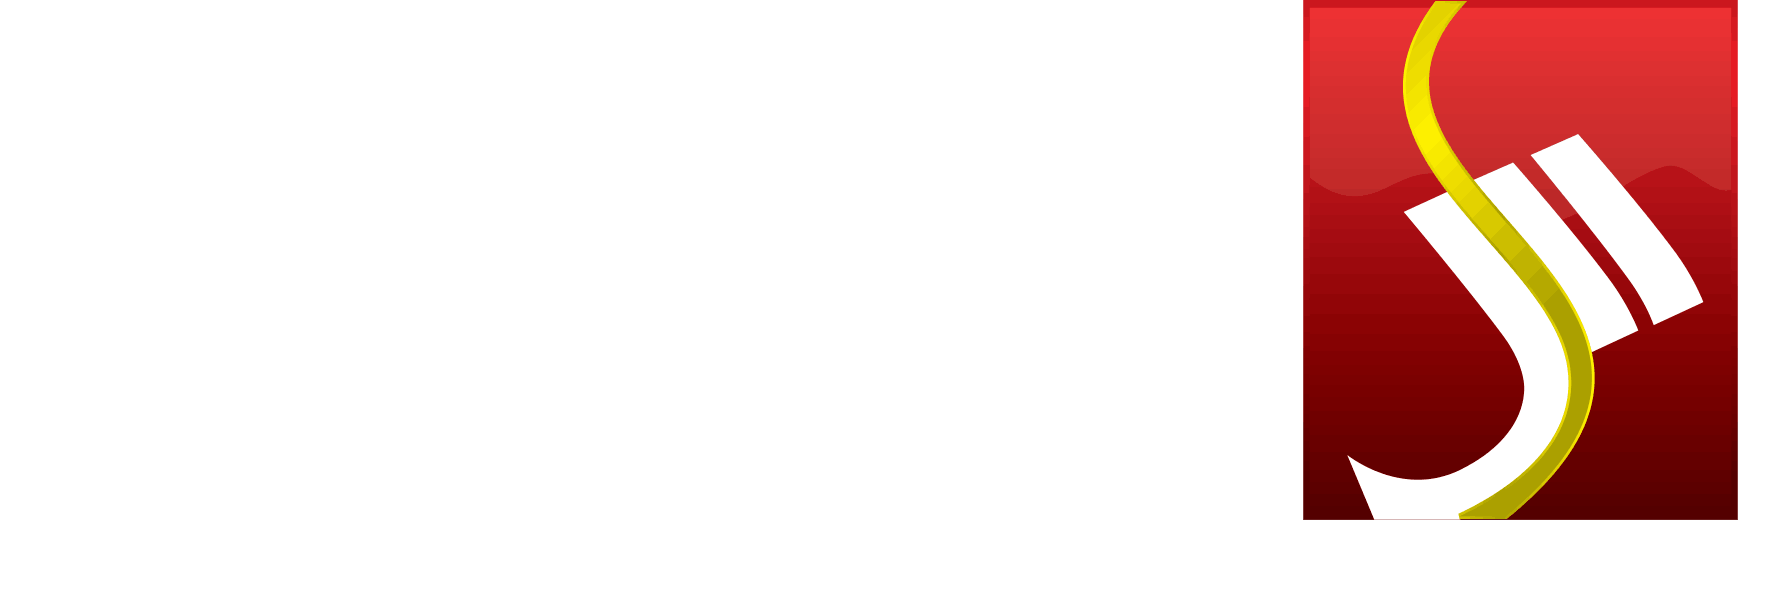 Alsayed Sons Company